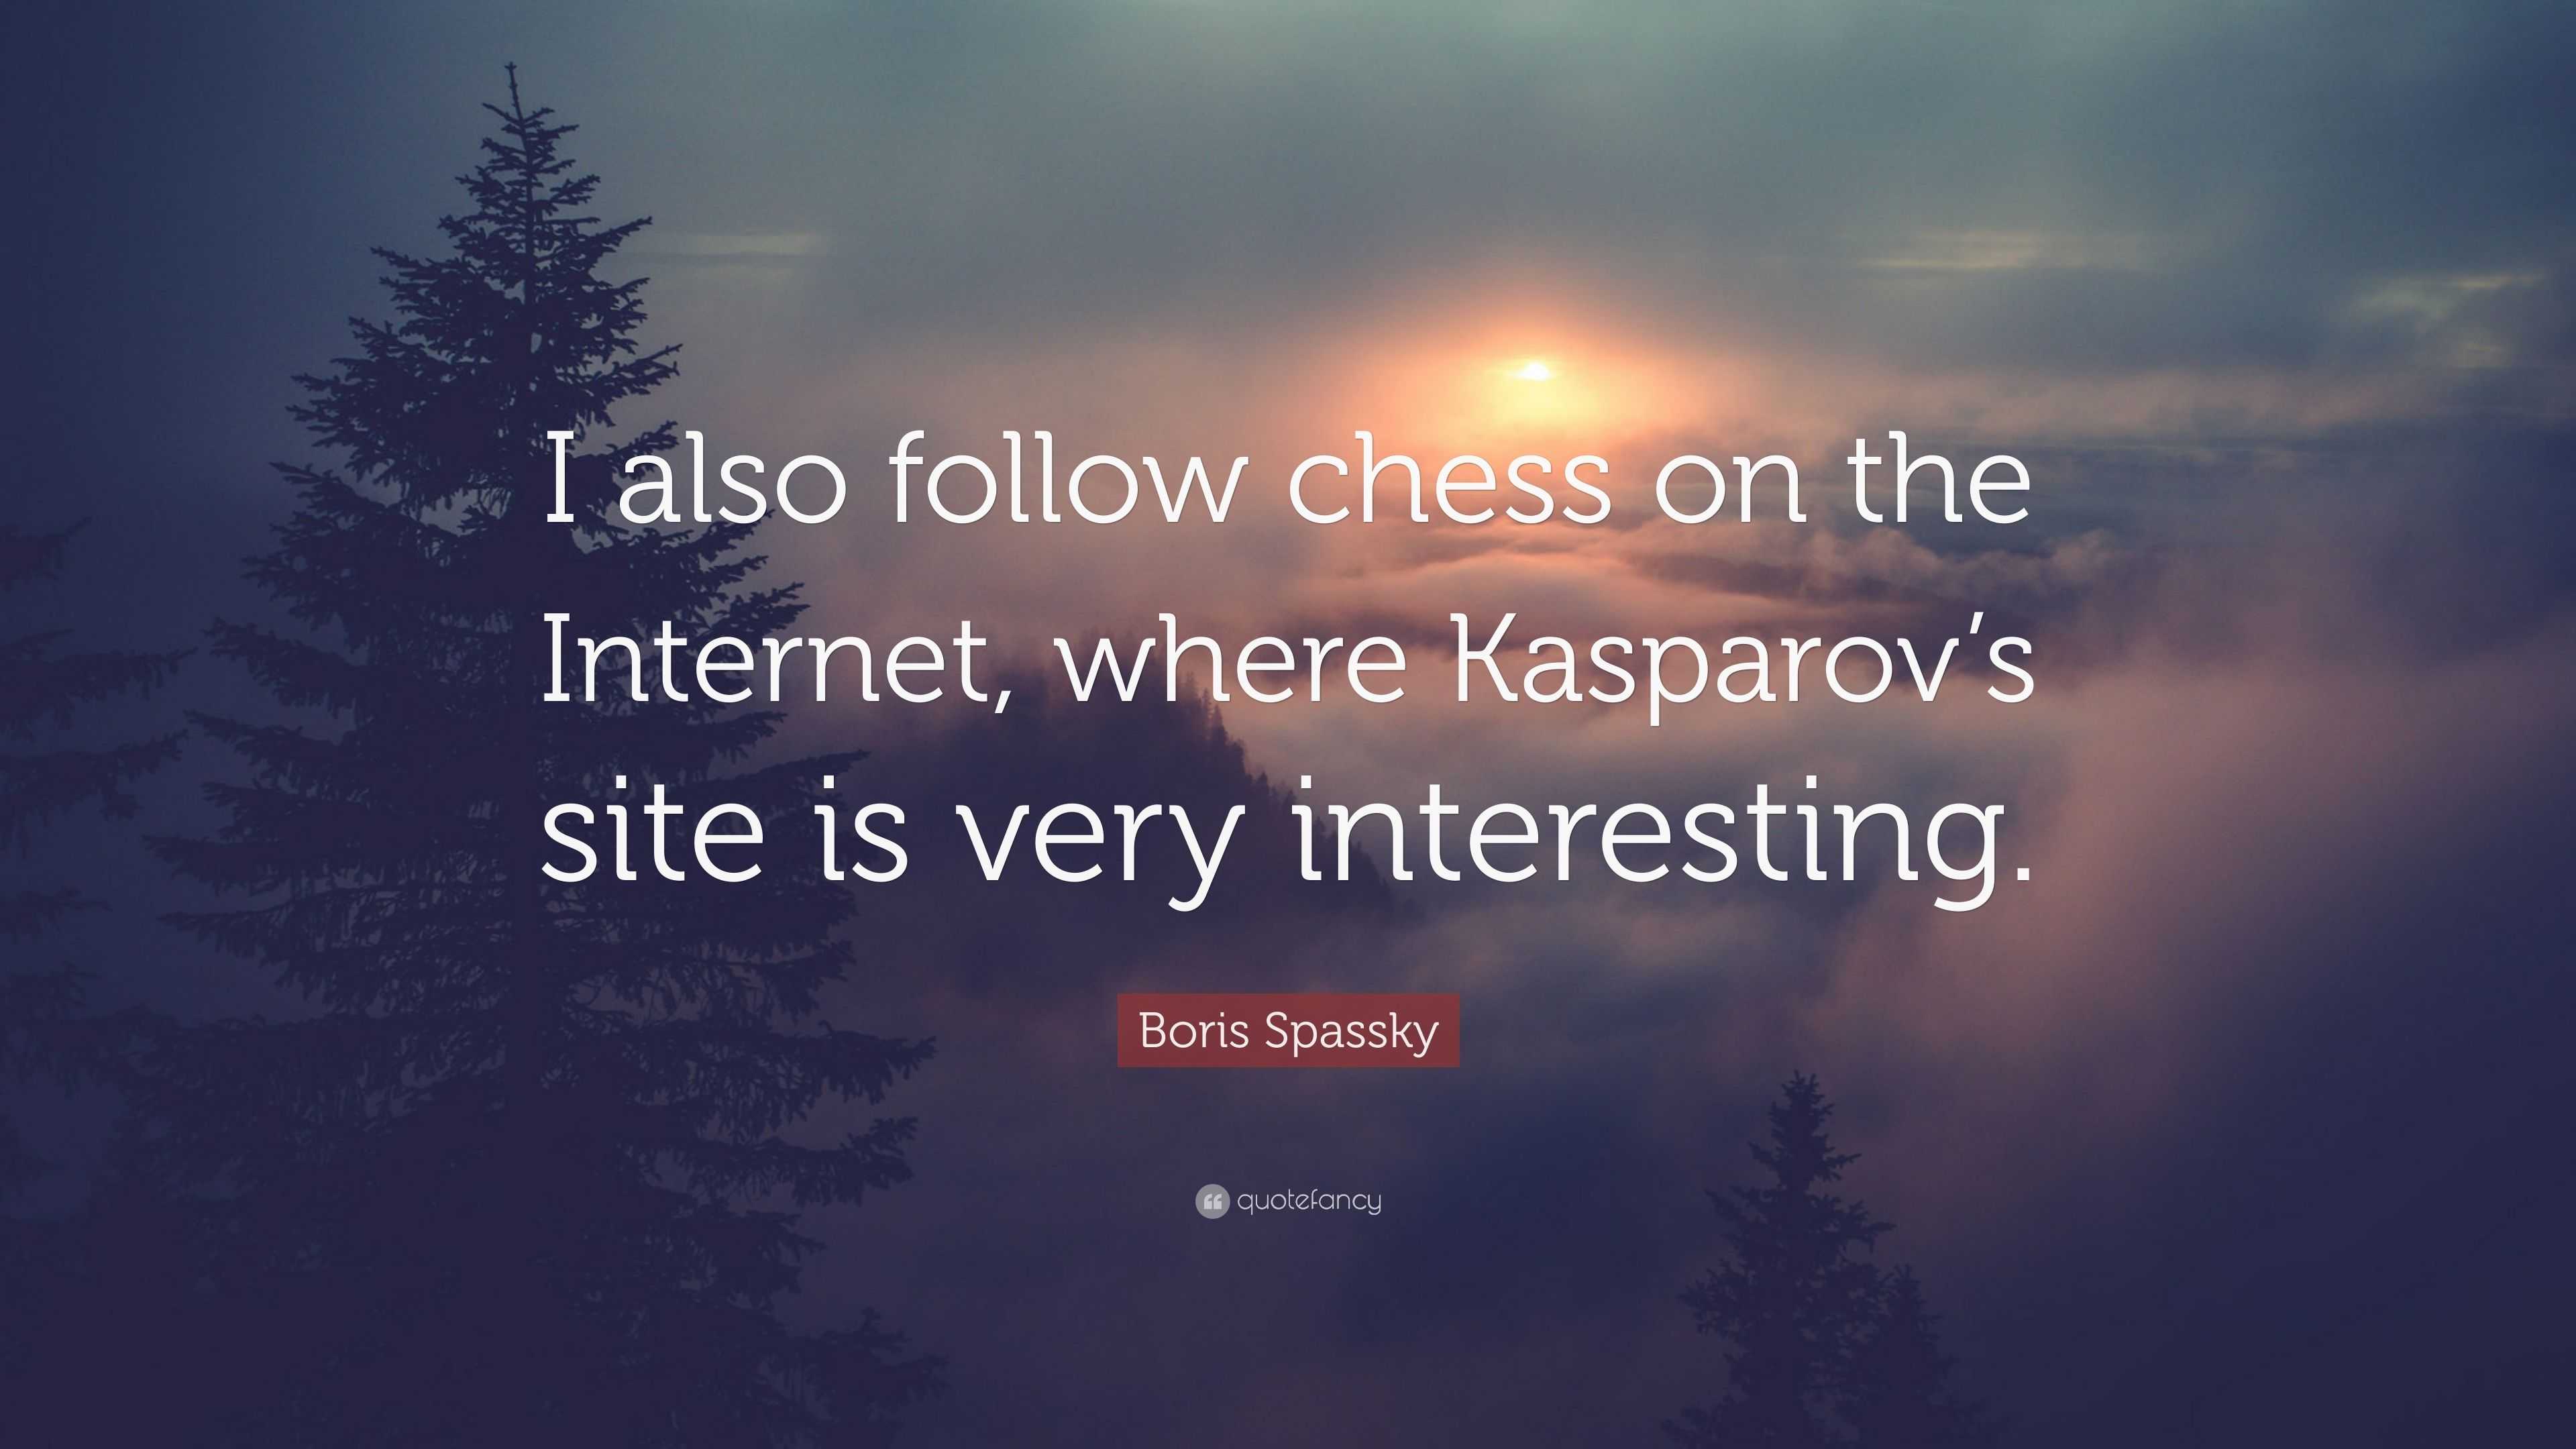 Boris Spassky Quote: “I also follow chess on the Internet, where